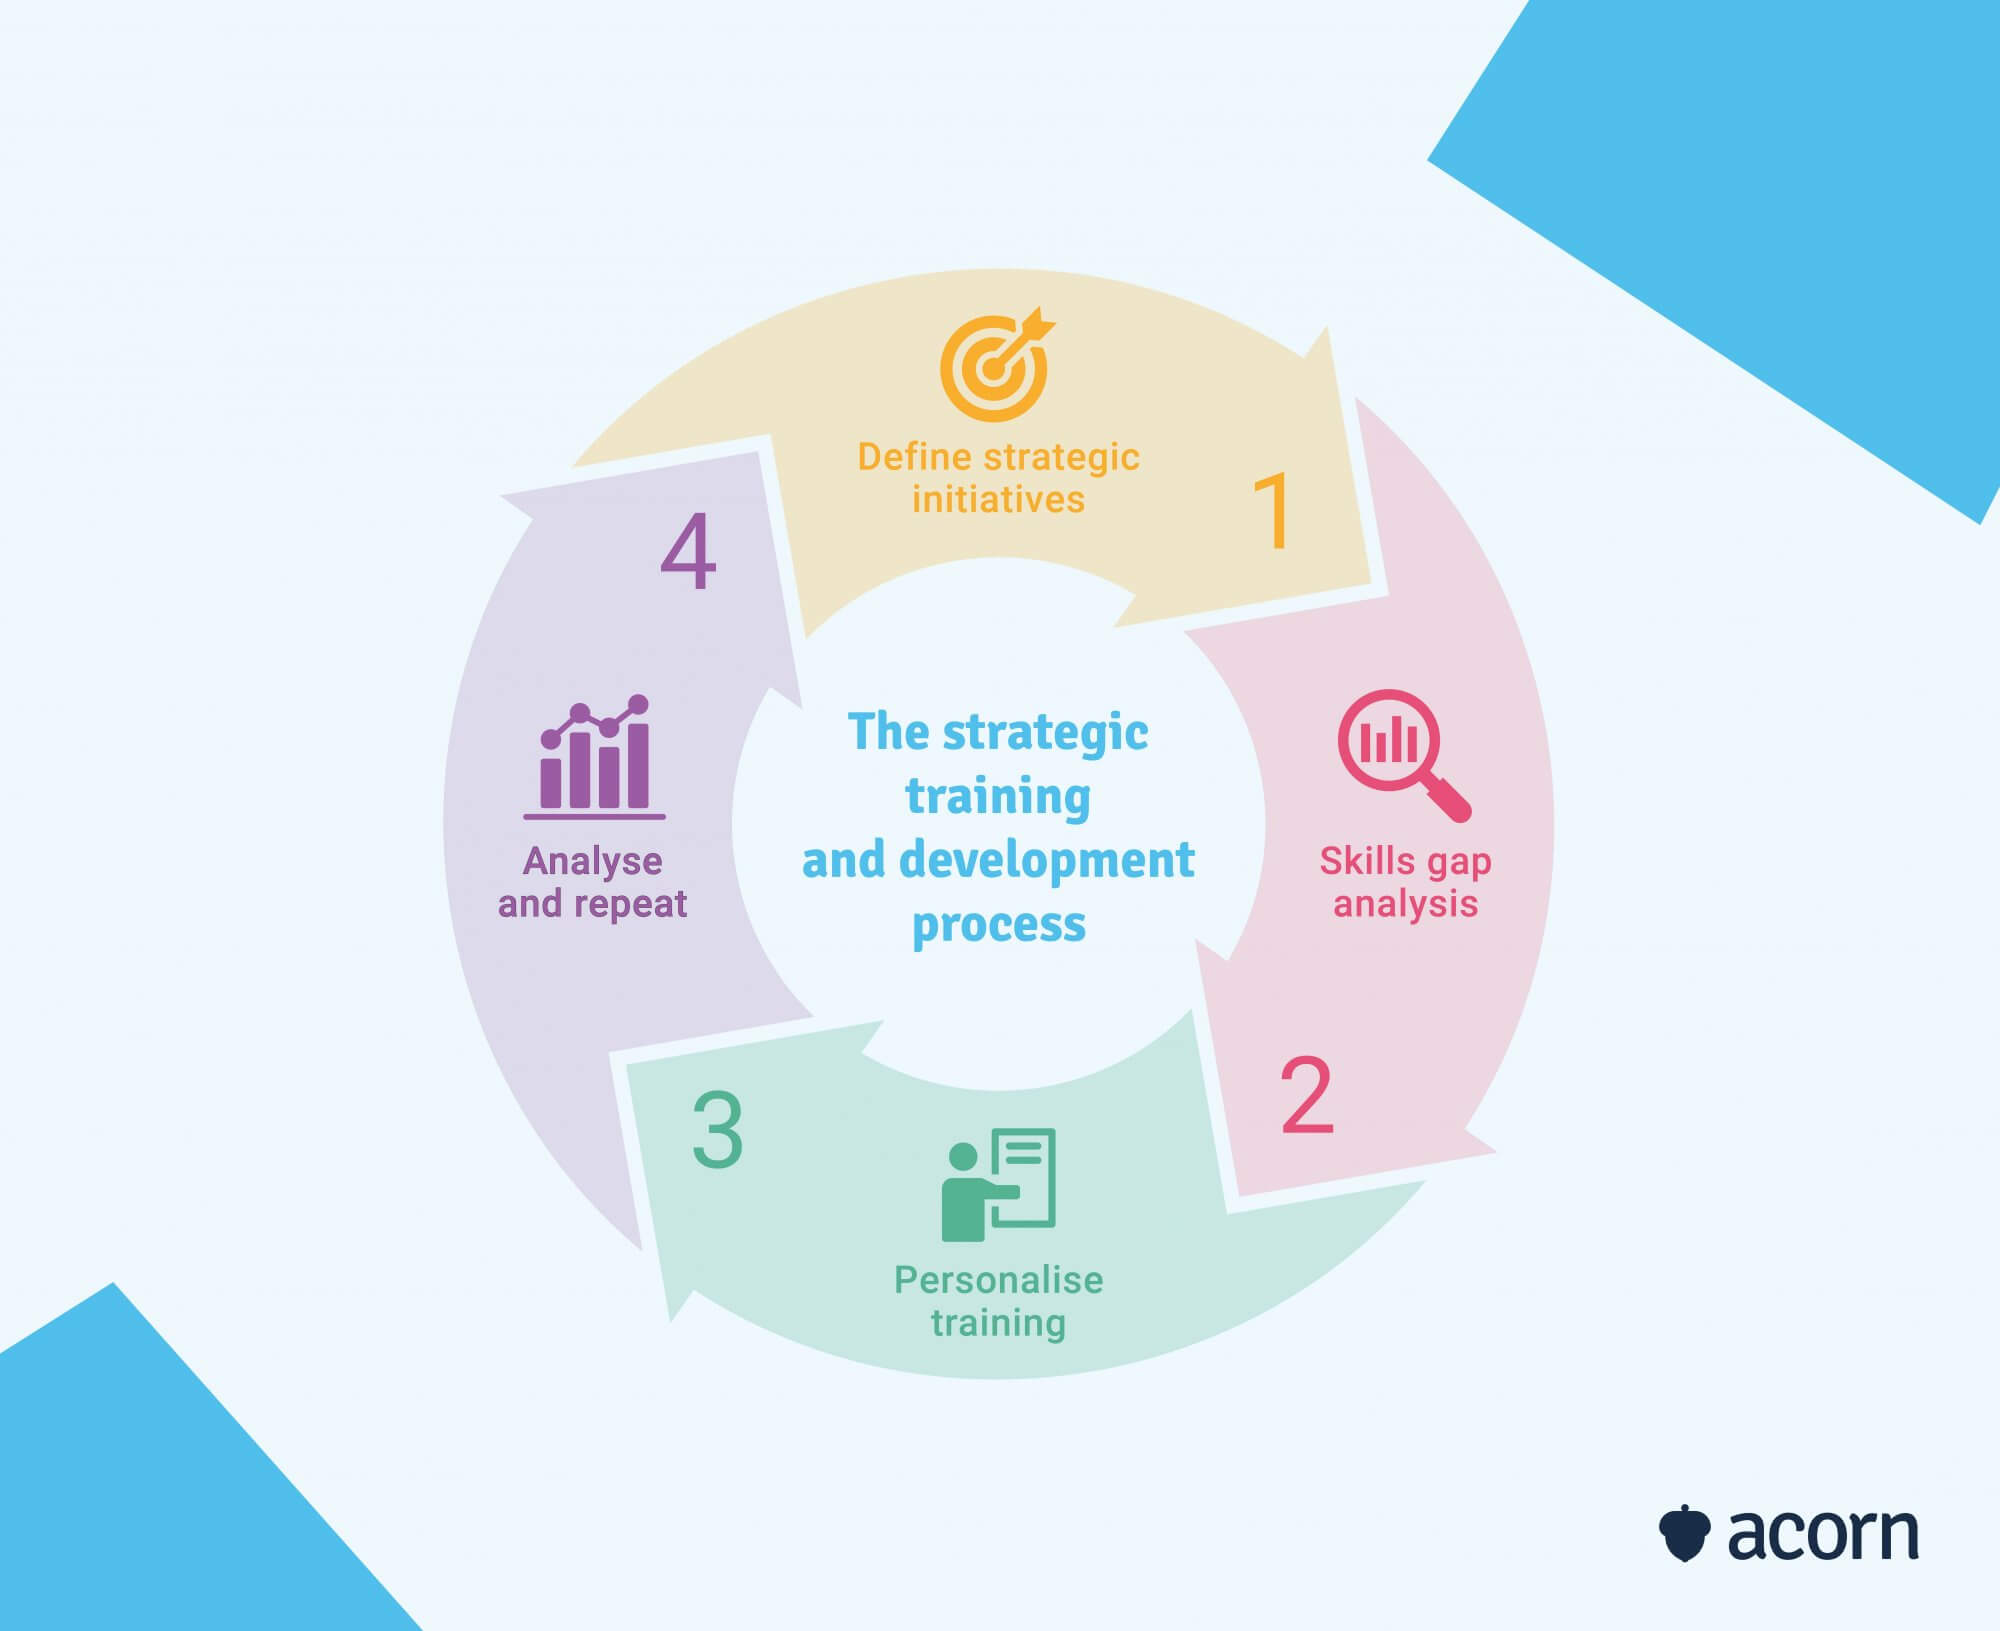 What are the 4 steps of the strategic training and development process?